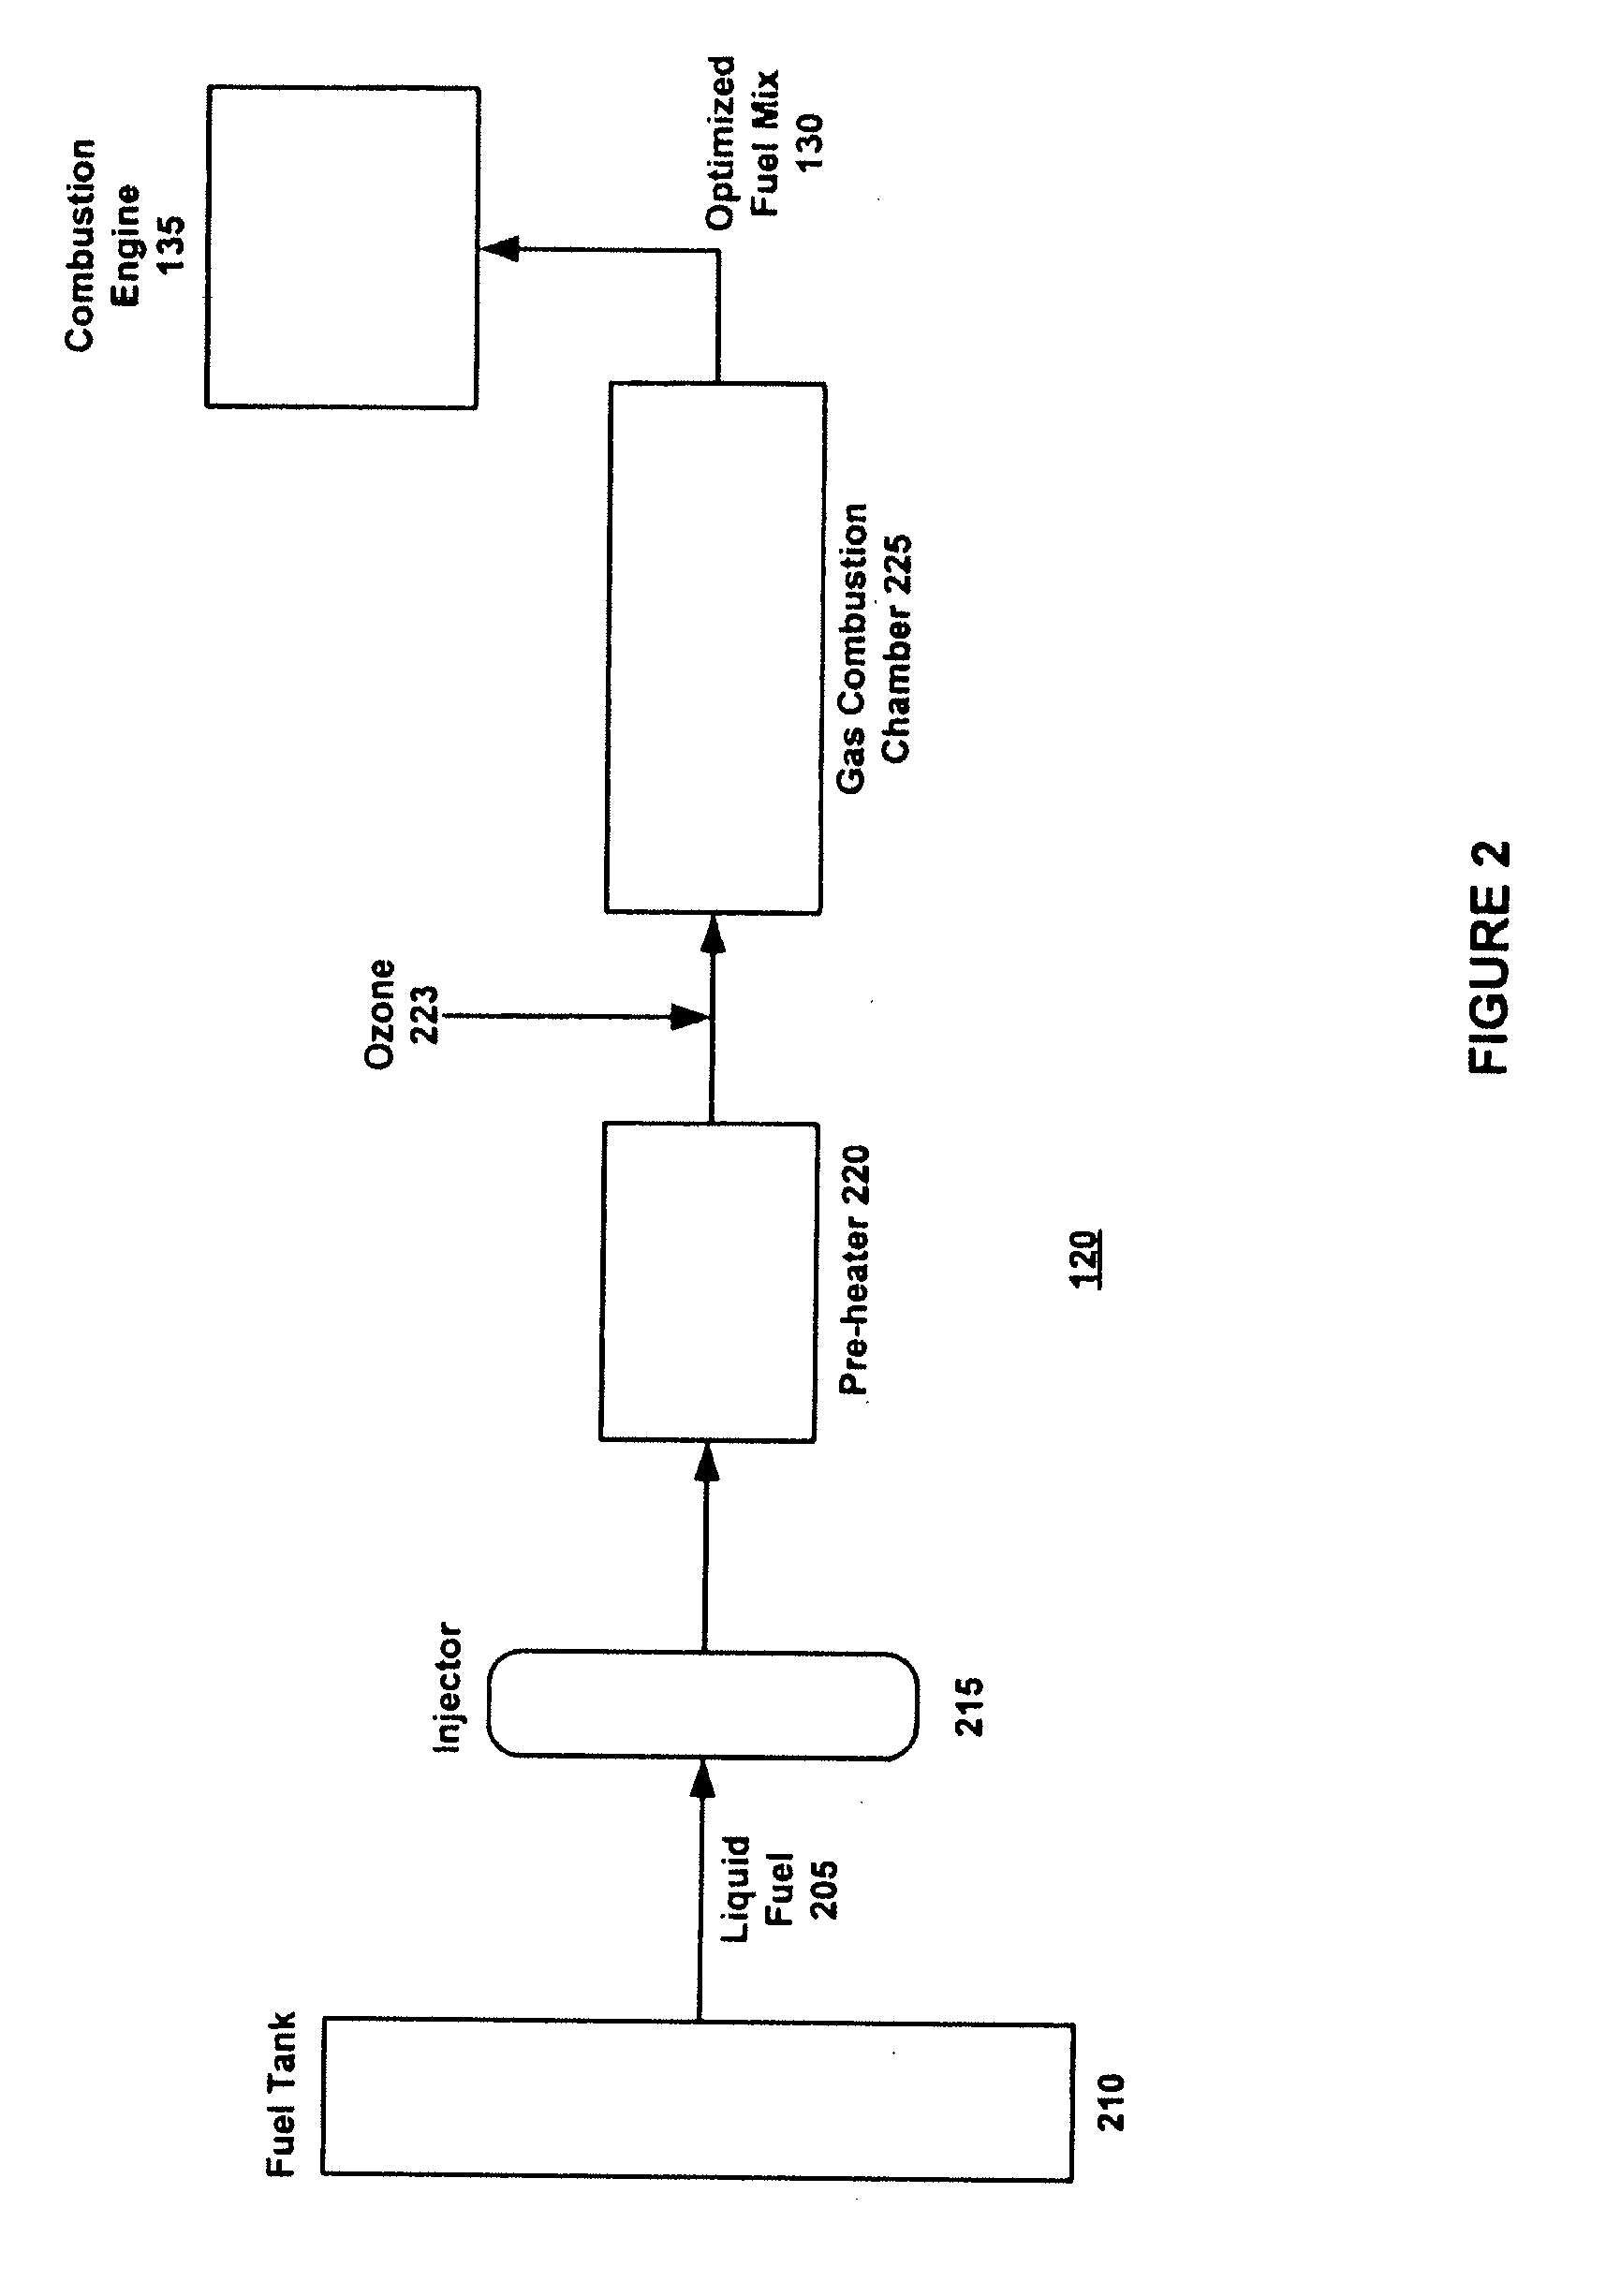 System and method for preparing an optimized fuel mixture